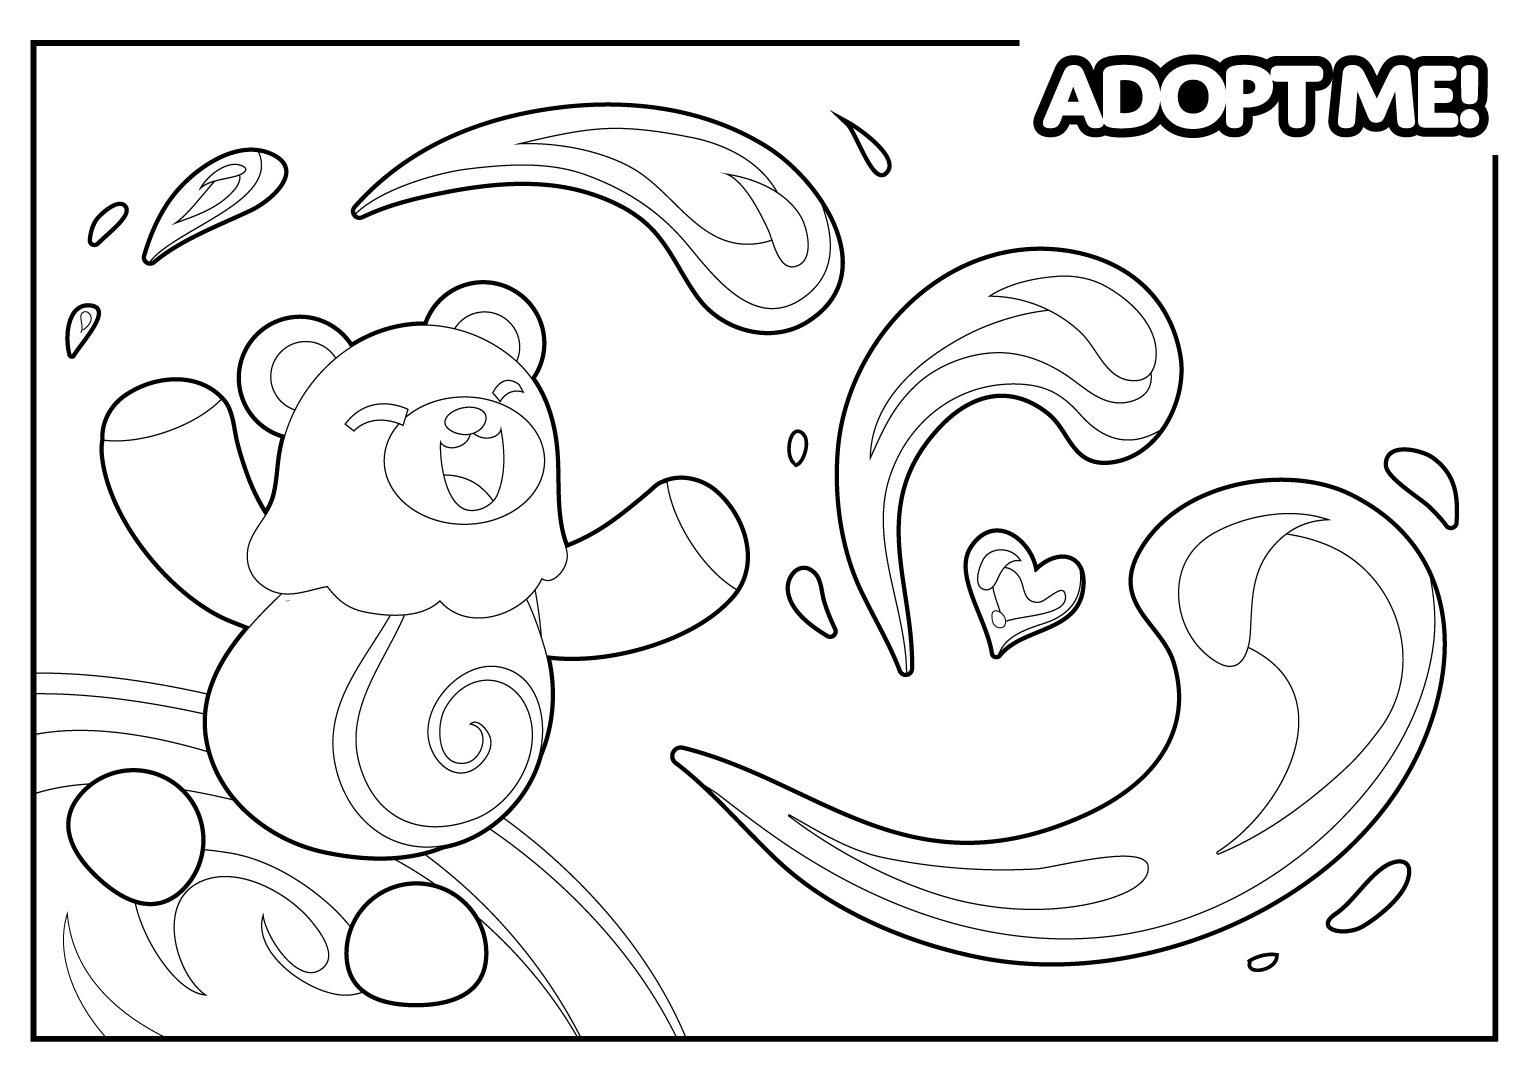 Coloring Pages - Adopt Me!